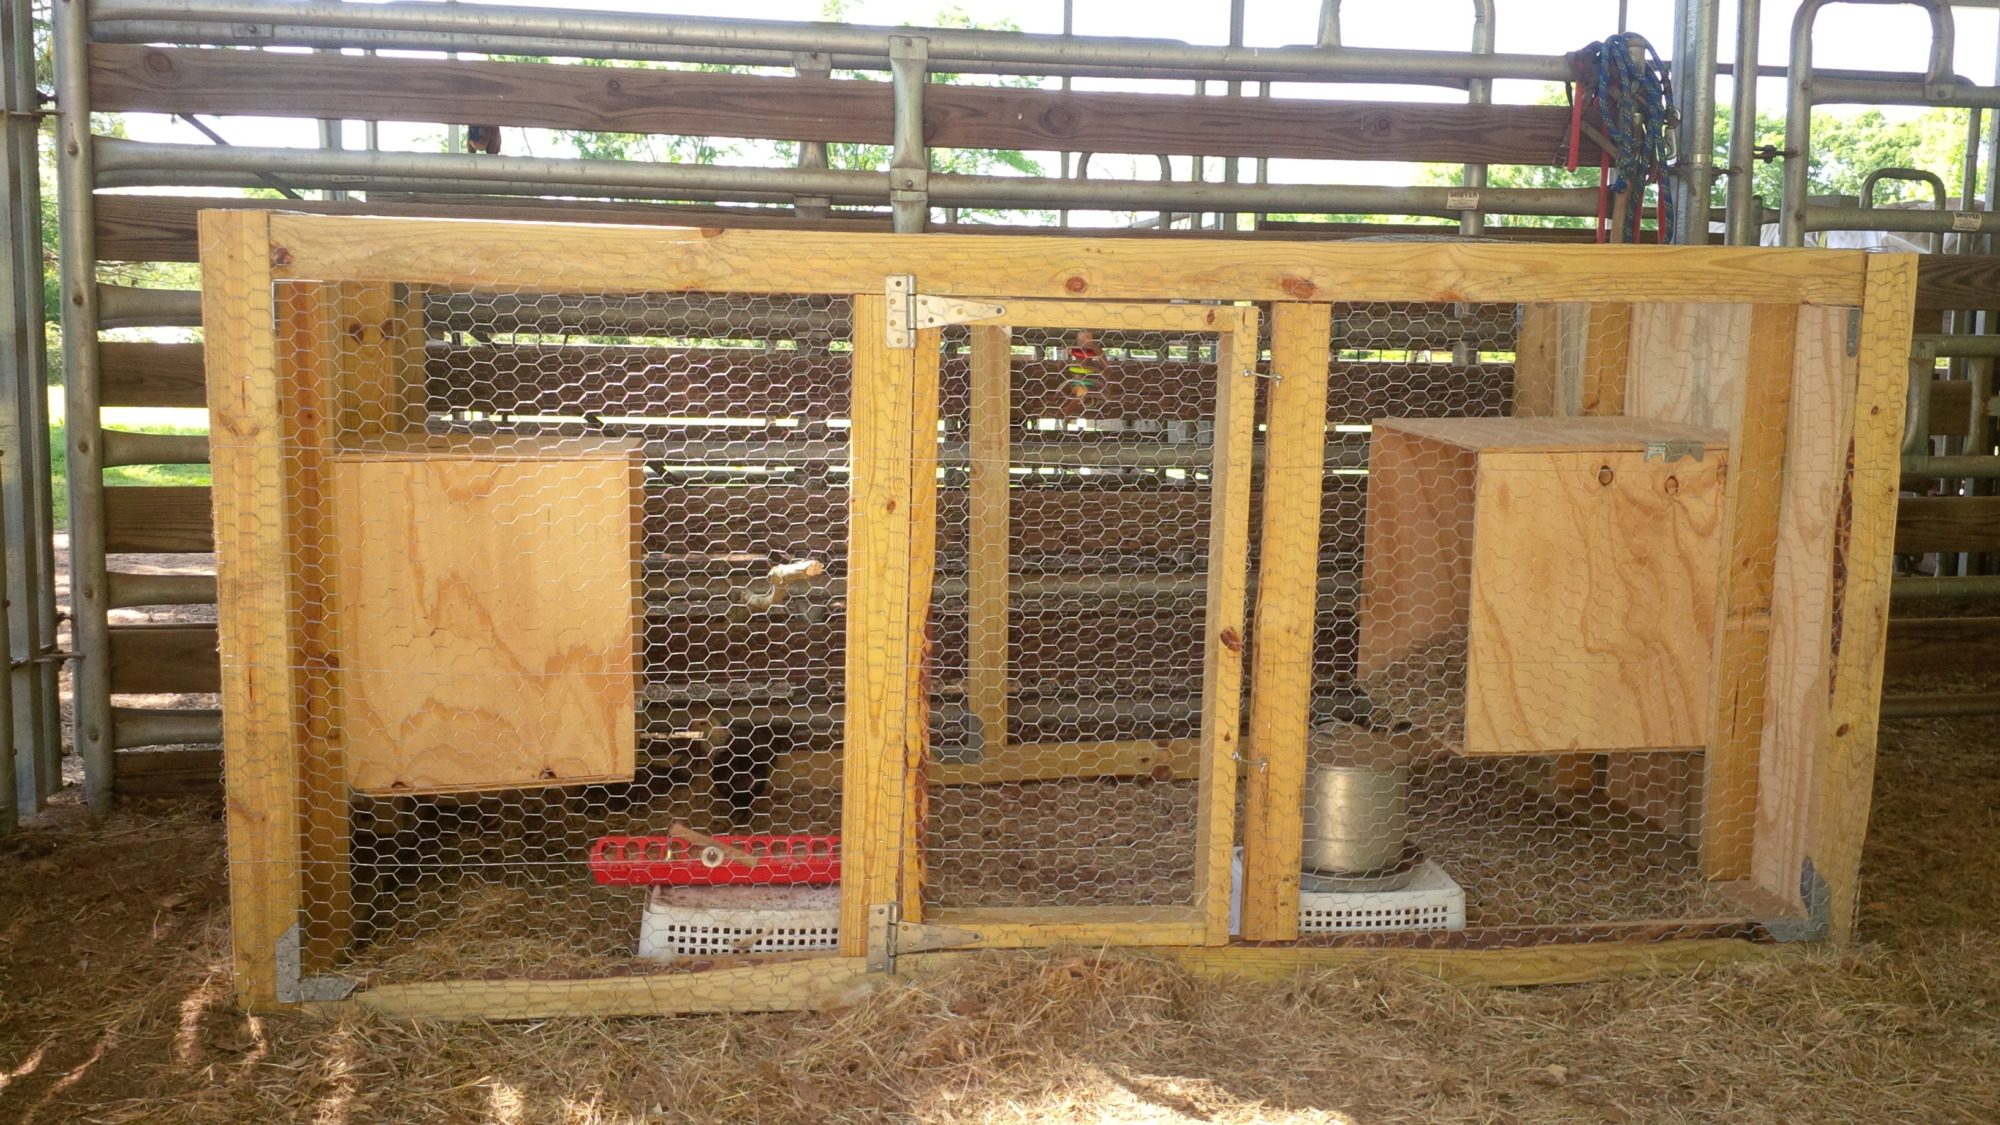 Our new chicken coup. My son and I built it to raise chicks in.